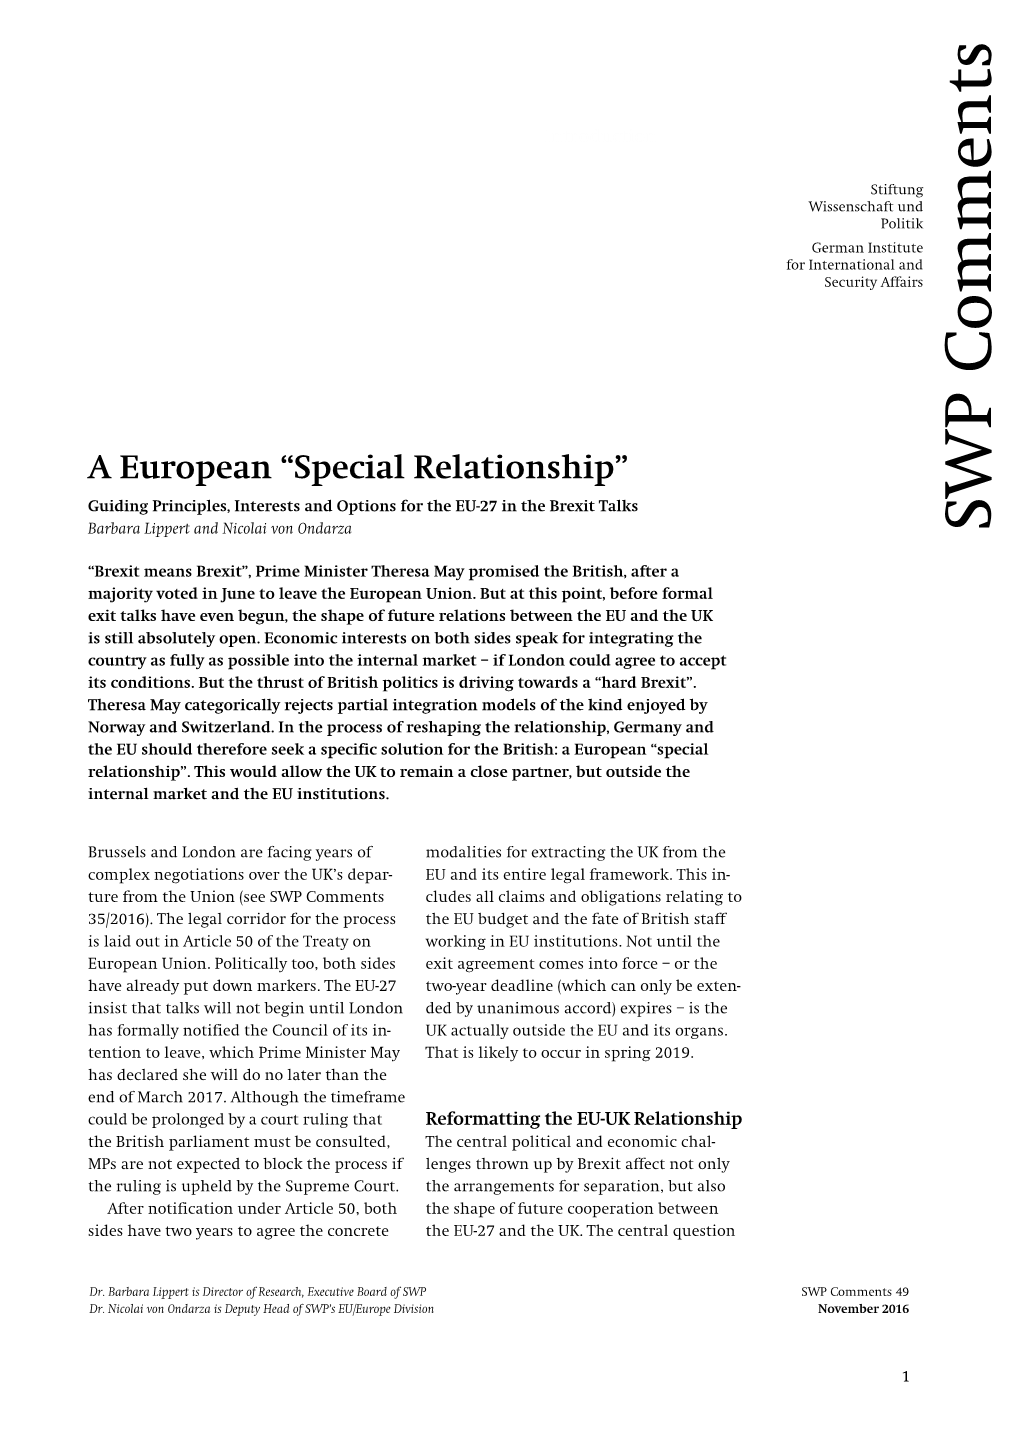 A European “Special Relationship”. Guiding Principles, Interests And